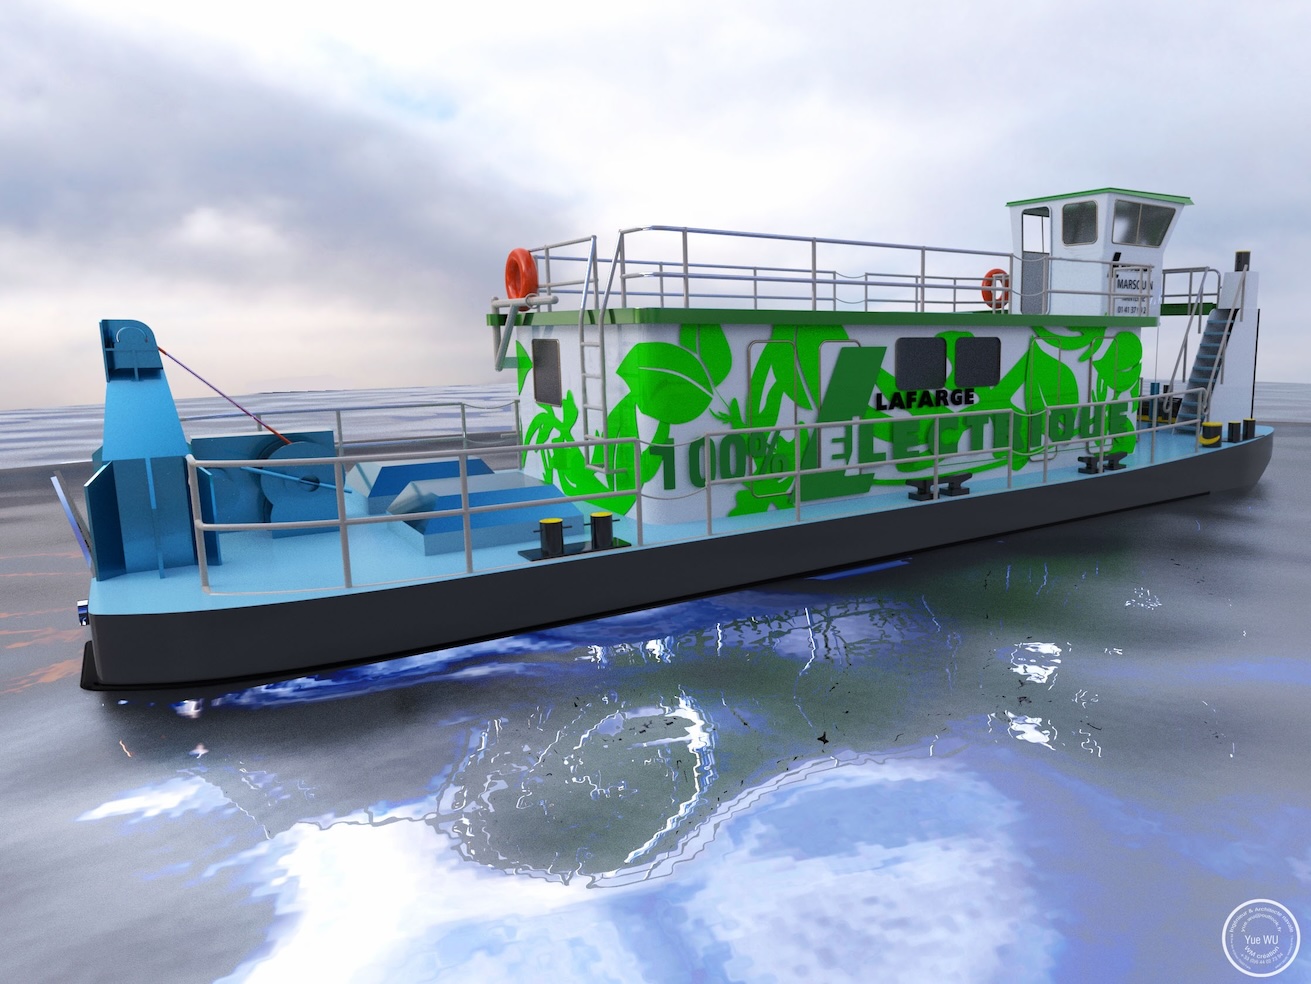 River transport: Lafarge converts its tug to batteries